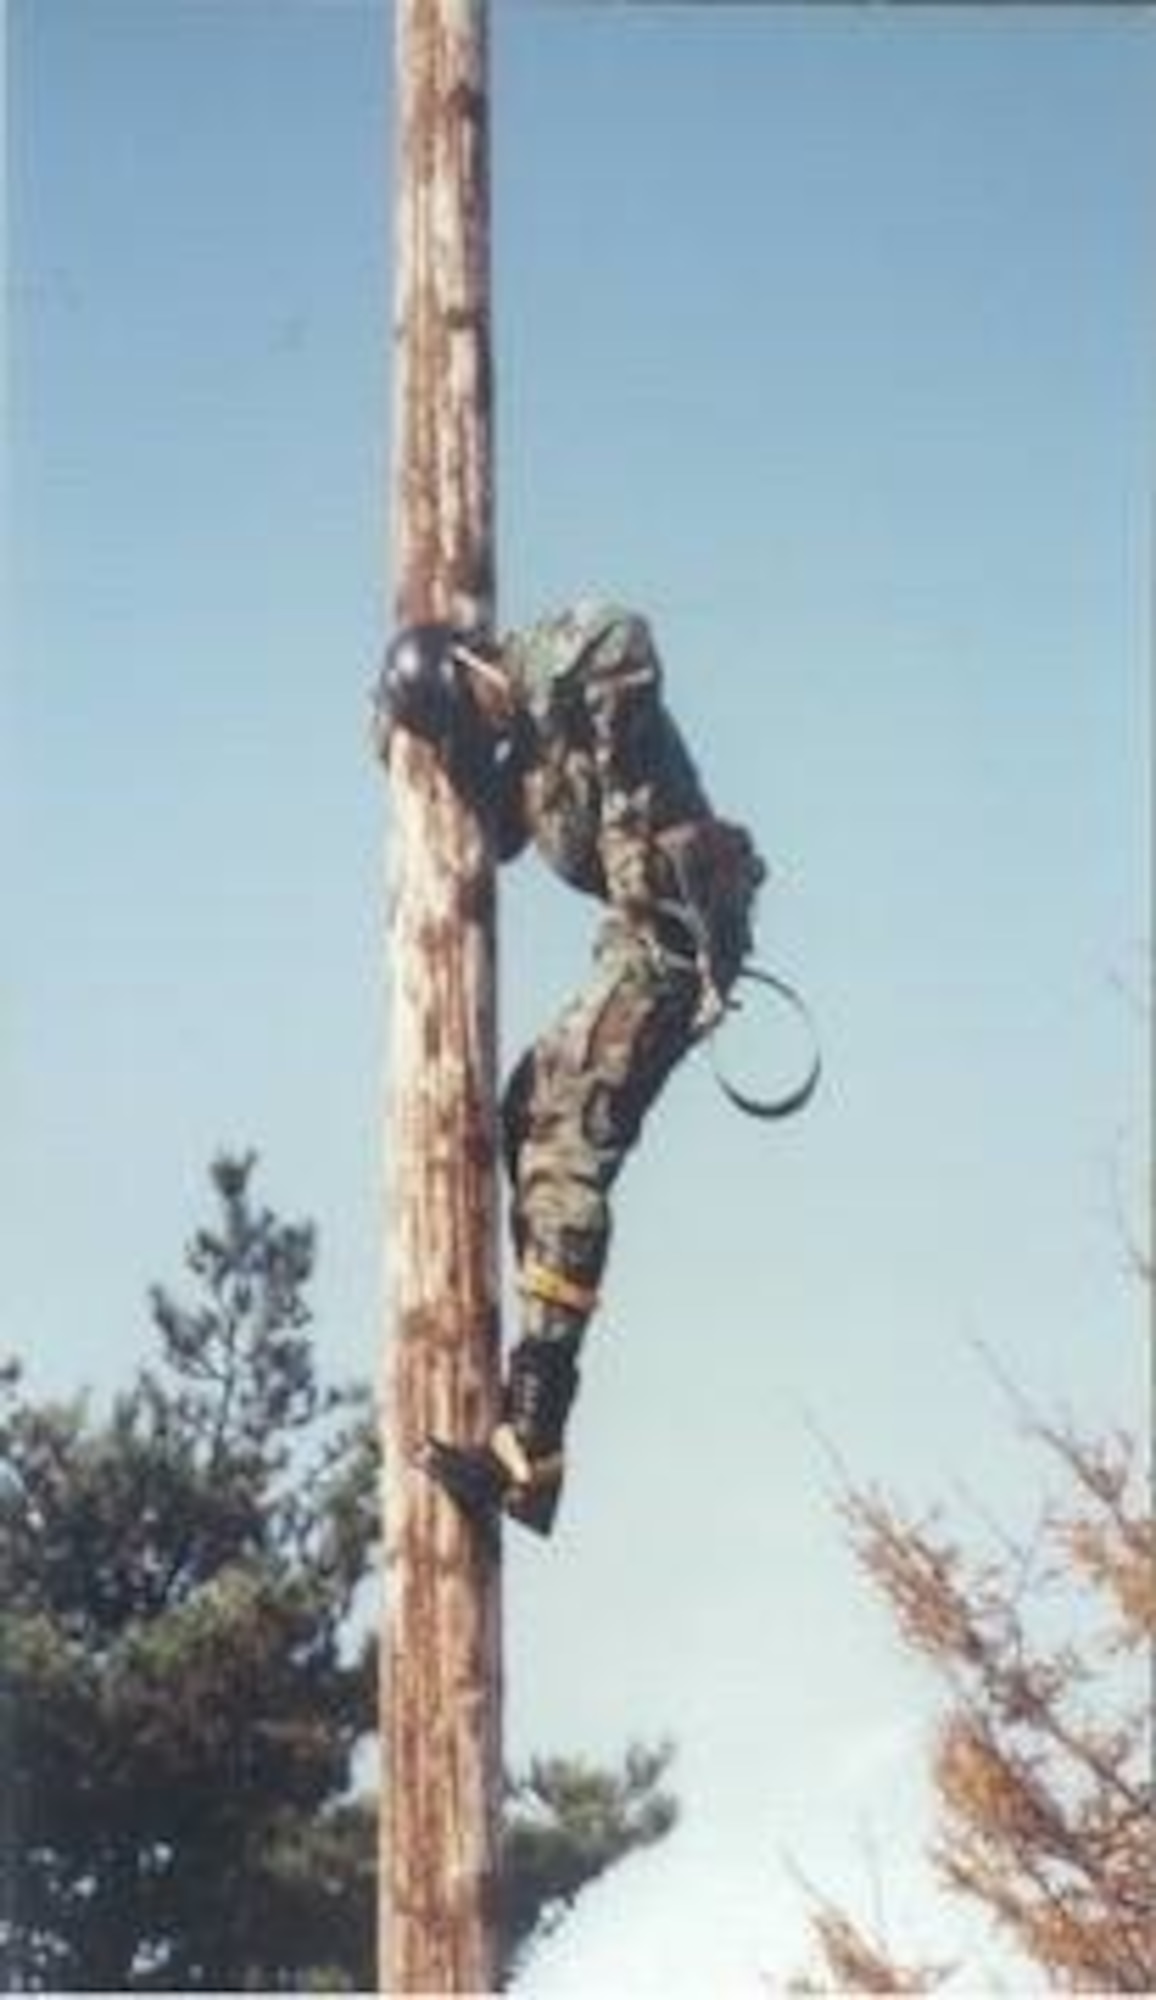 Dr. Carlos Braziel, working as an electrician as an enlisted airman.(Photo: courtesy).